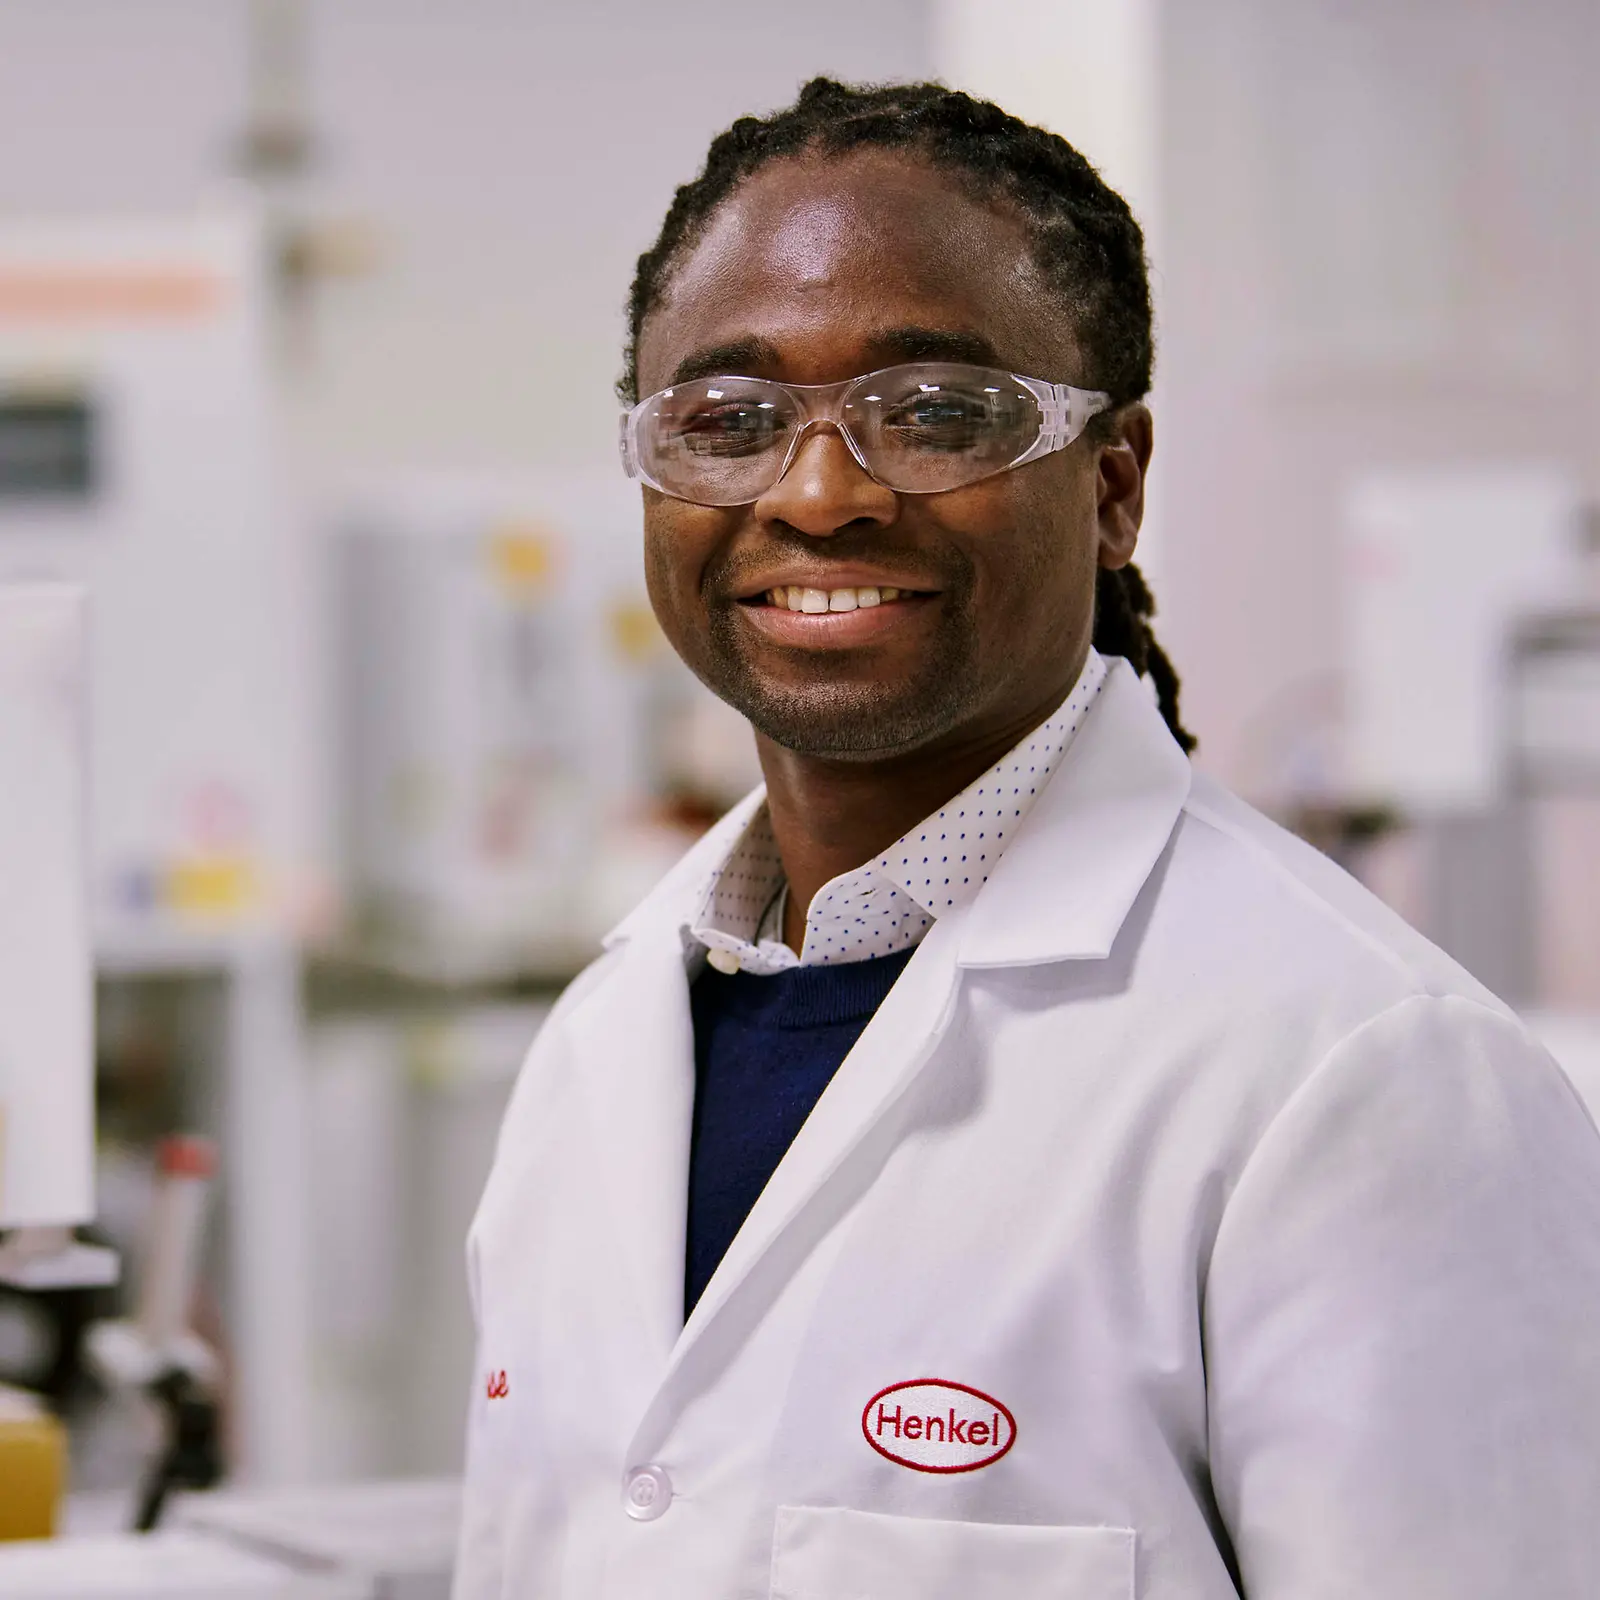 A man in a lab coat with Henkel logo standing in a lab next to a microscope